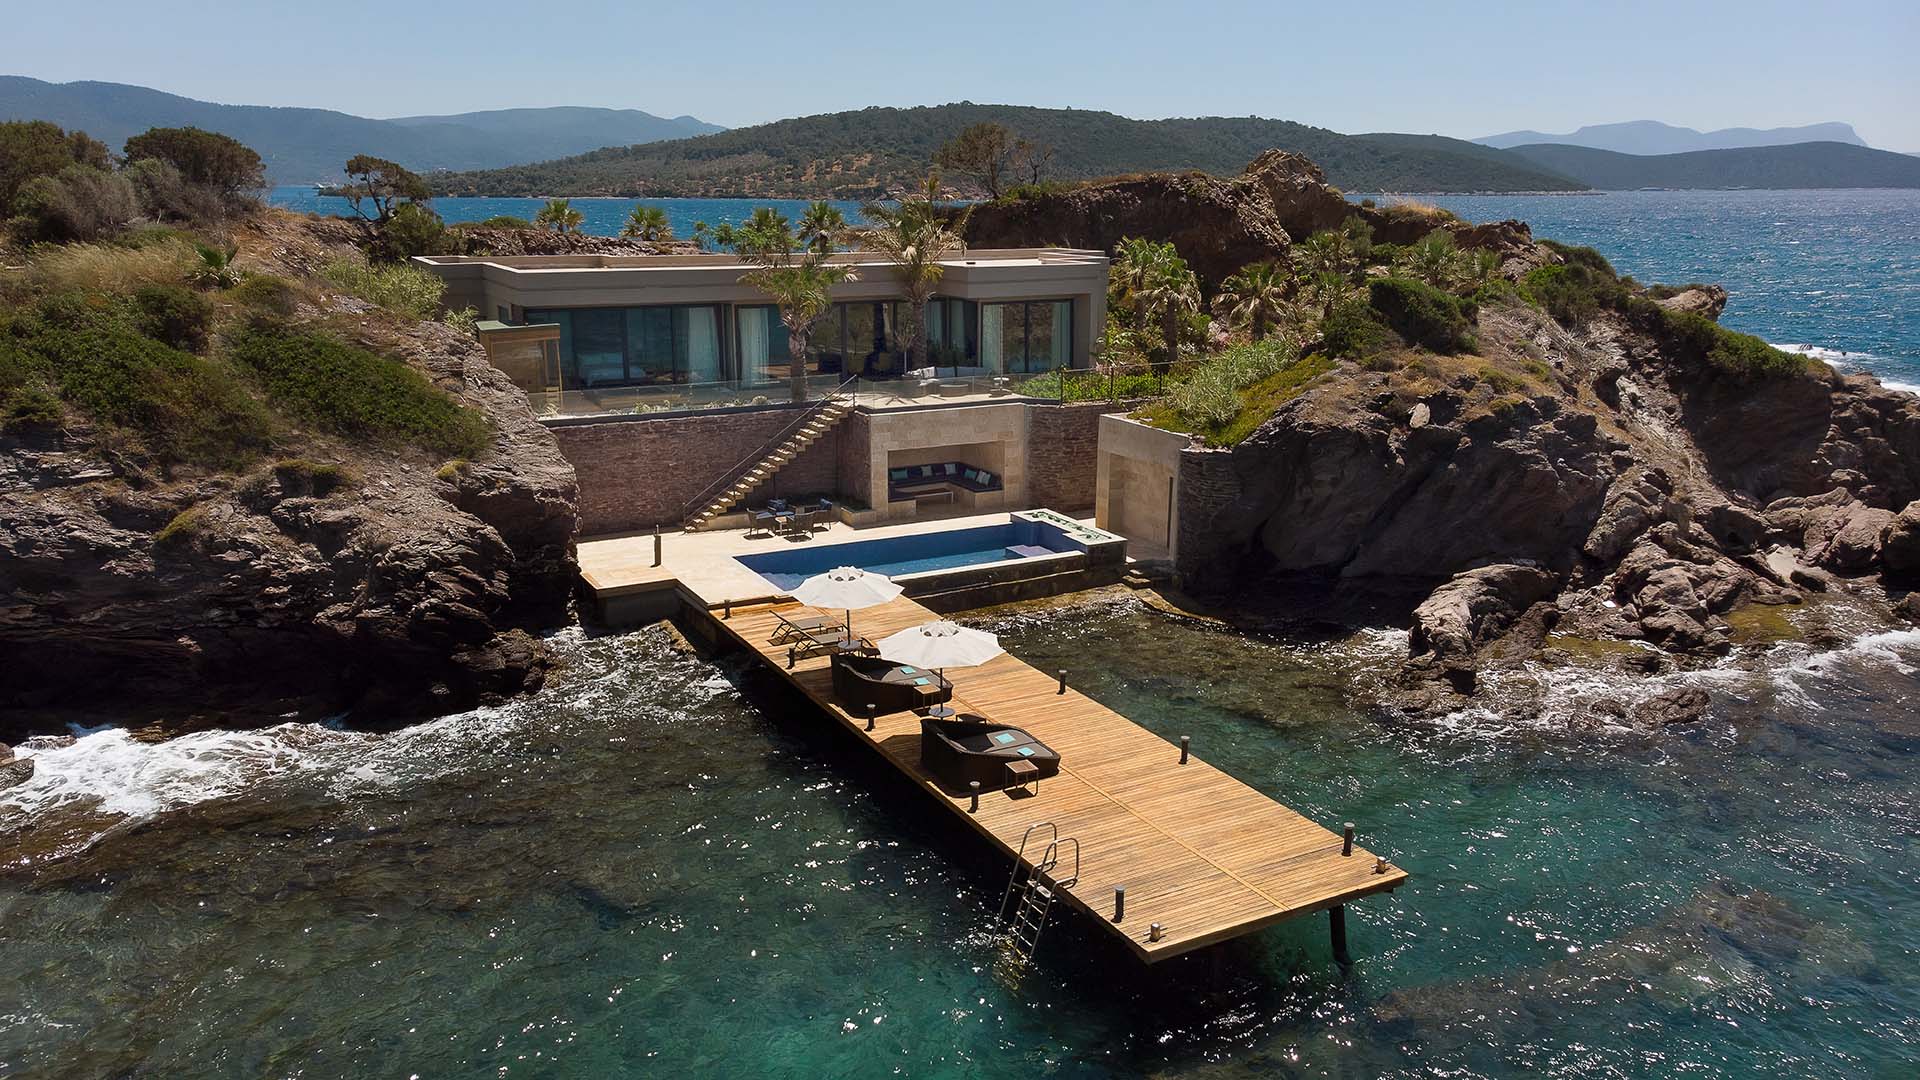 dock and private pool on the rocky Aegean coast at the Secluded Bay Villa at Le Méridien Bodrum Beach Resort